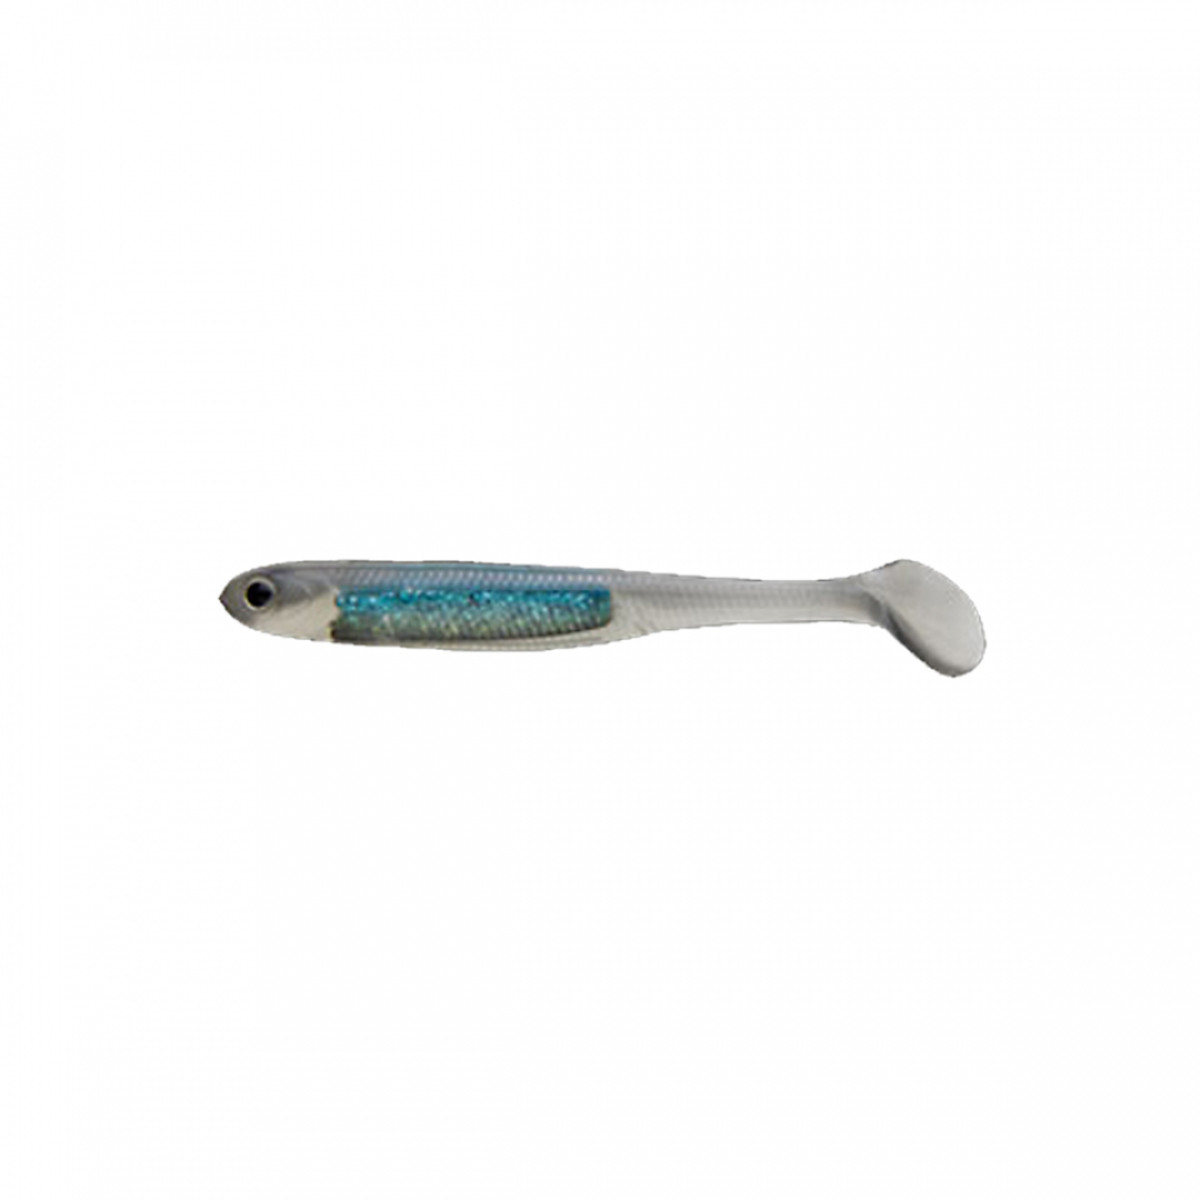 Nories Spoon Tail Shad 4.5